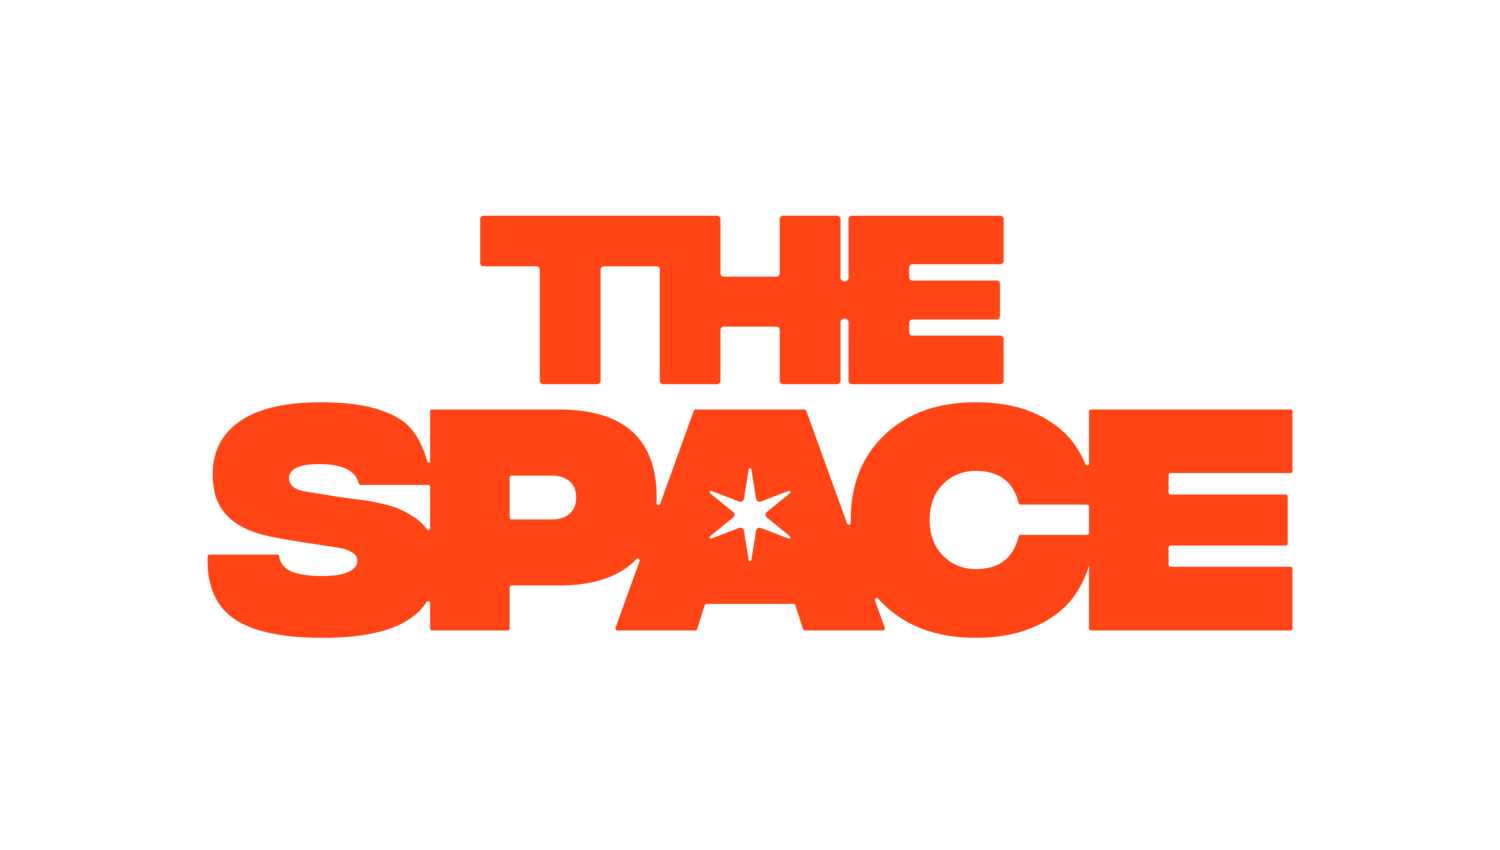 THE SPACE